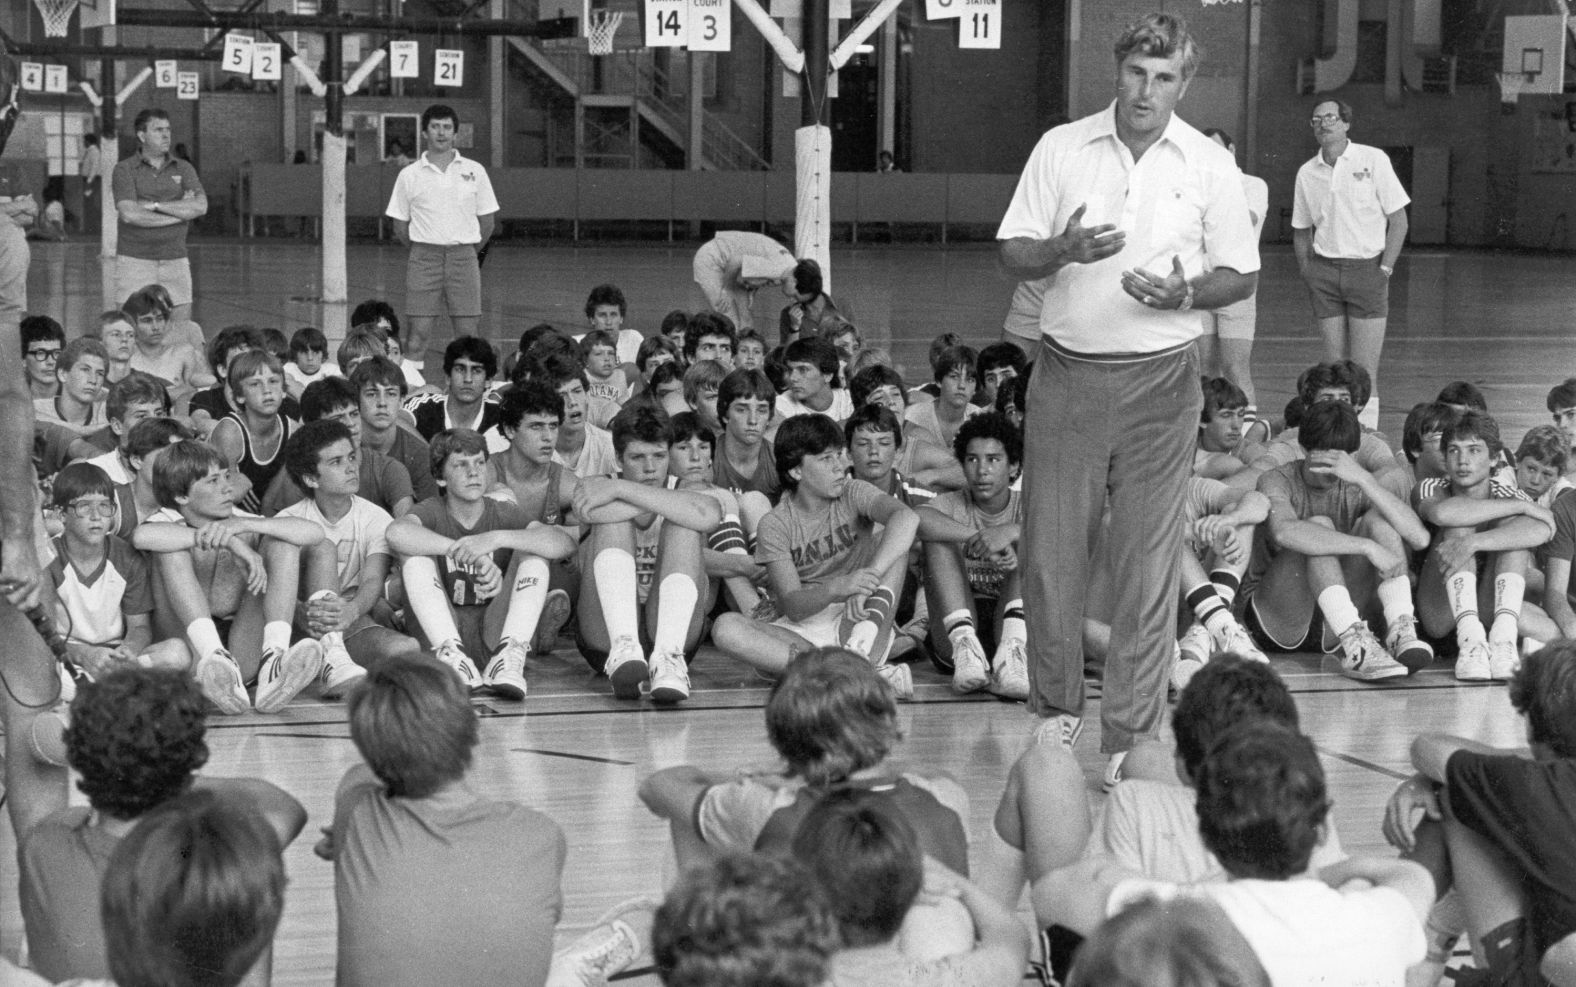 Knight talks to a group of young basketball players attending the Bobby Knight Basketball School in 1983.